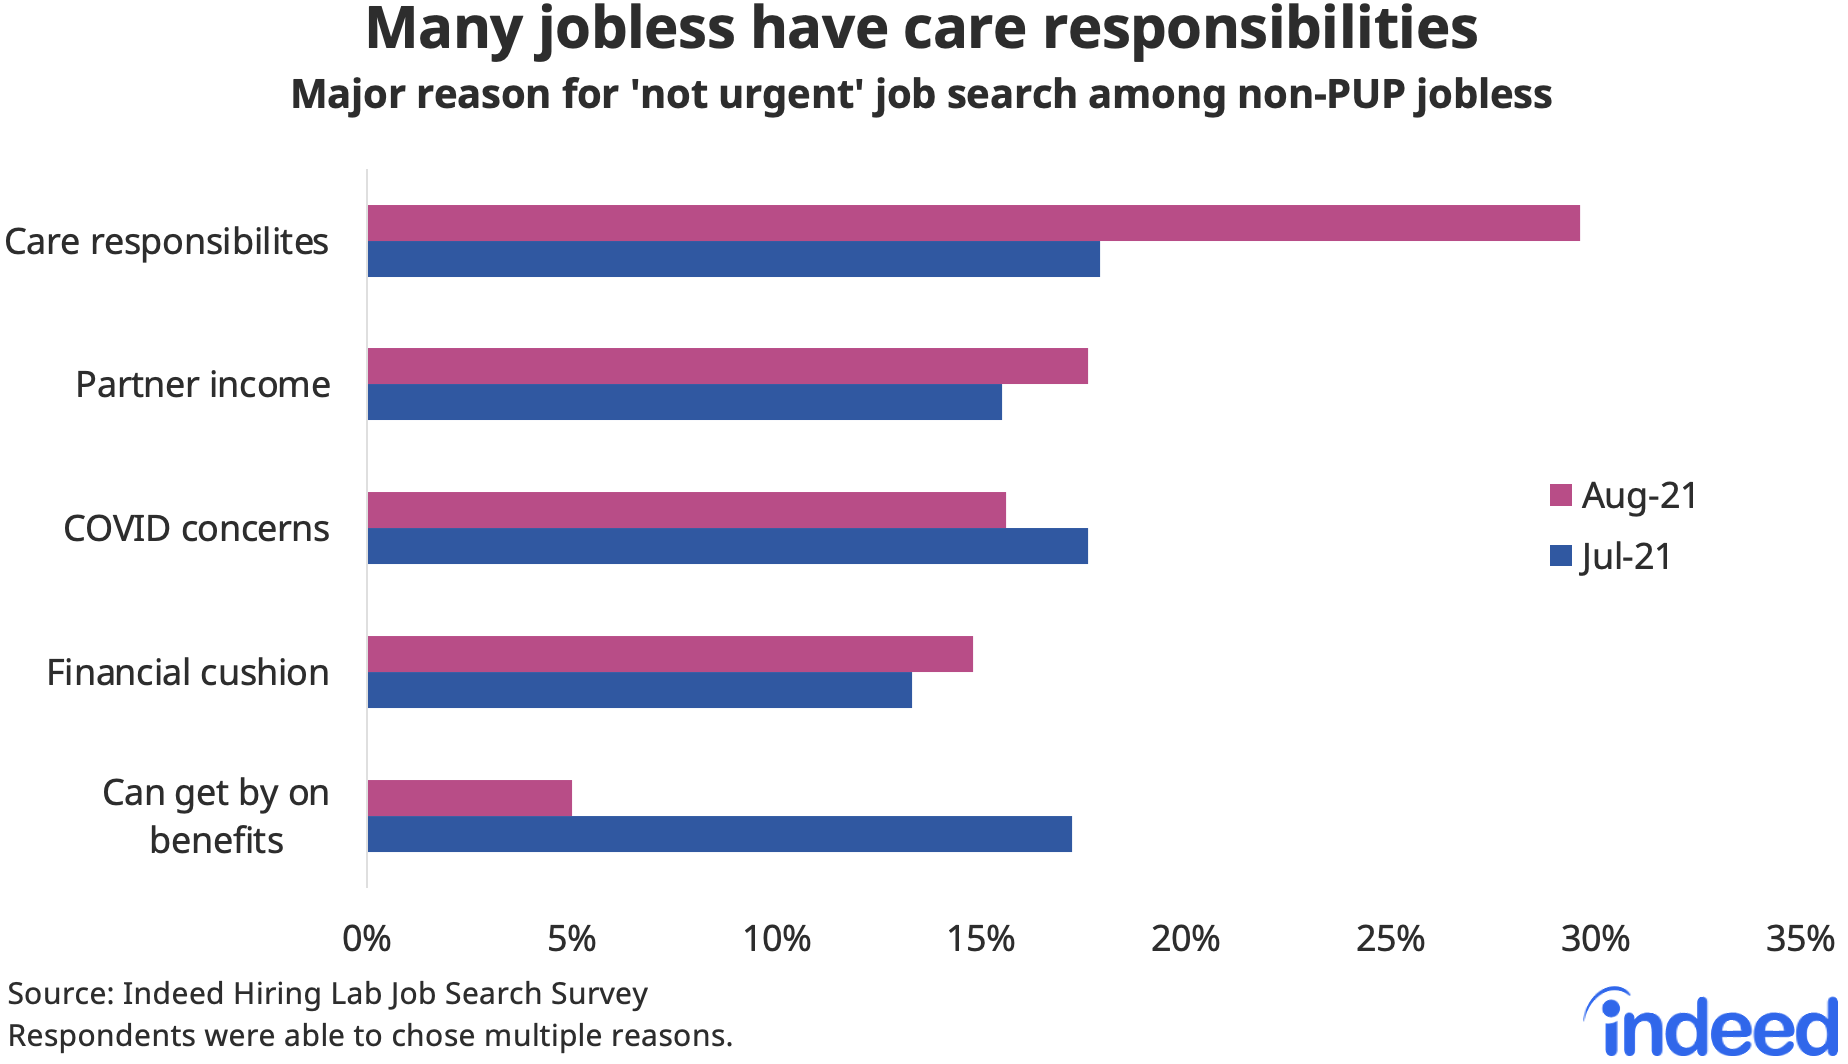 Bar chart titled “Many jobless have care responsibilities.”